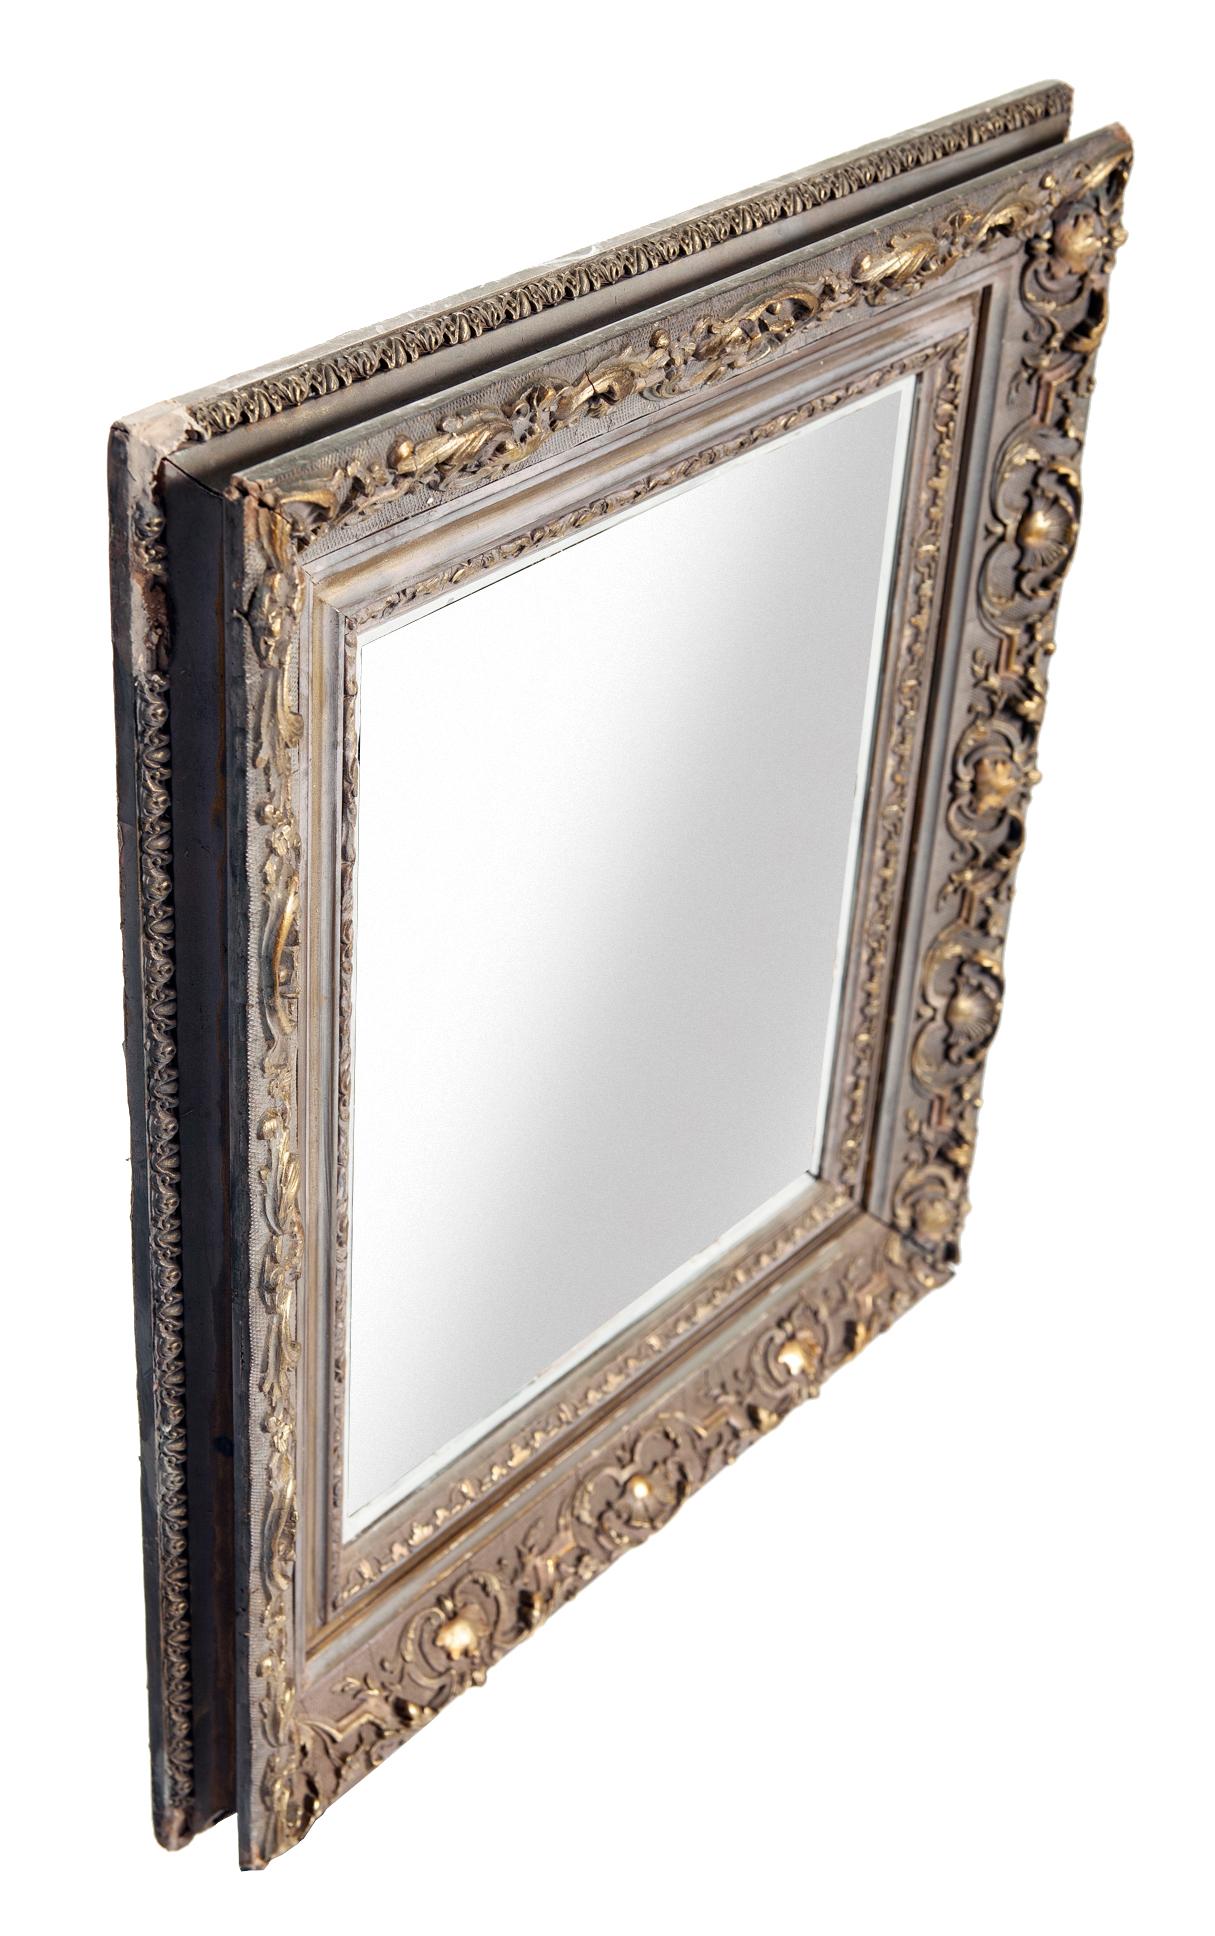 Victorian Rectangular Painted Mirror with Gilt Accents In Good Condition For Sale In Malibu, CA